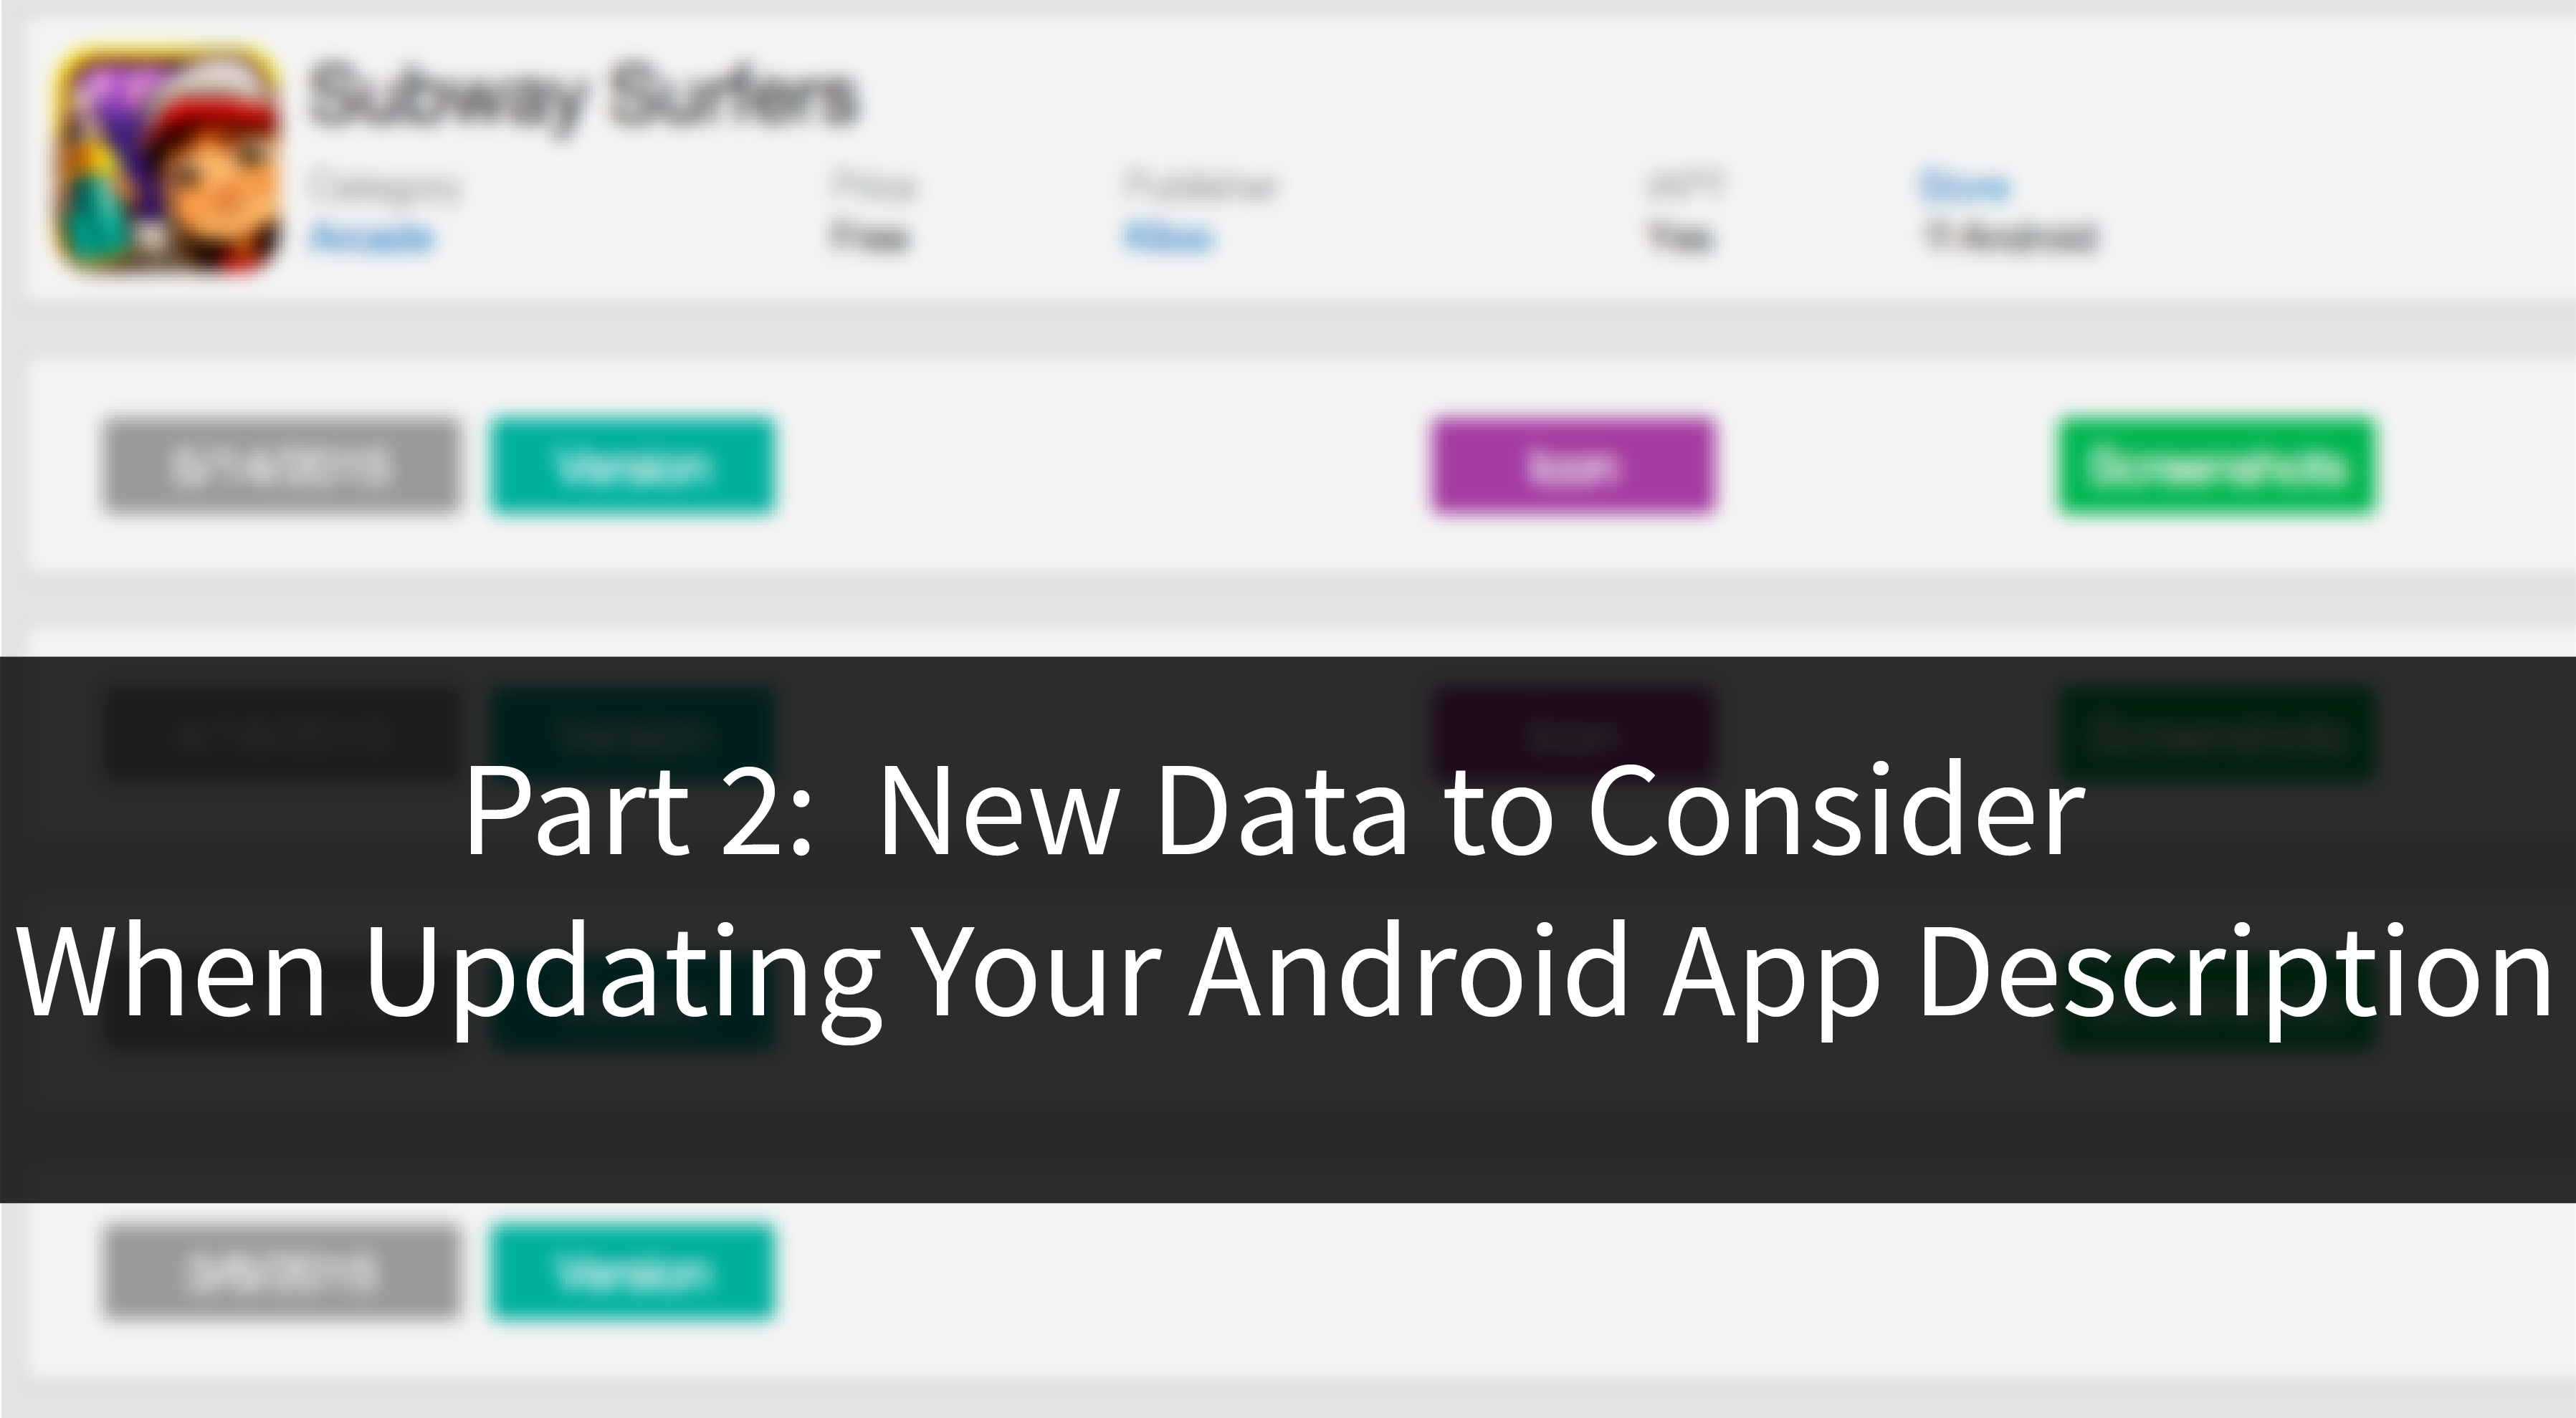 lt="Part 2: New Data to Consider When Updating Your Android App Description